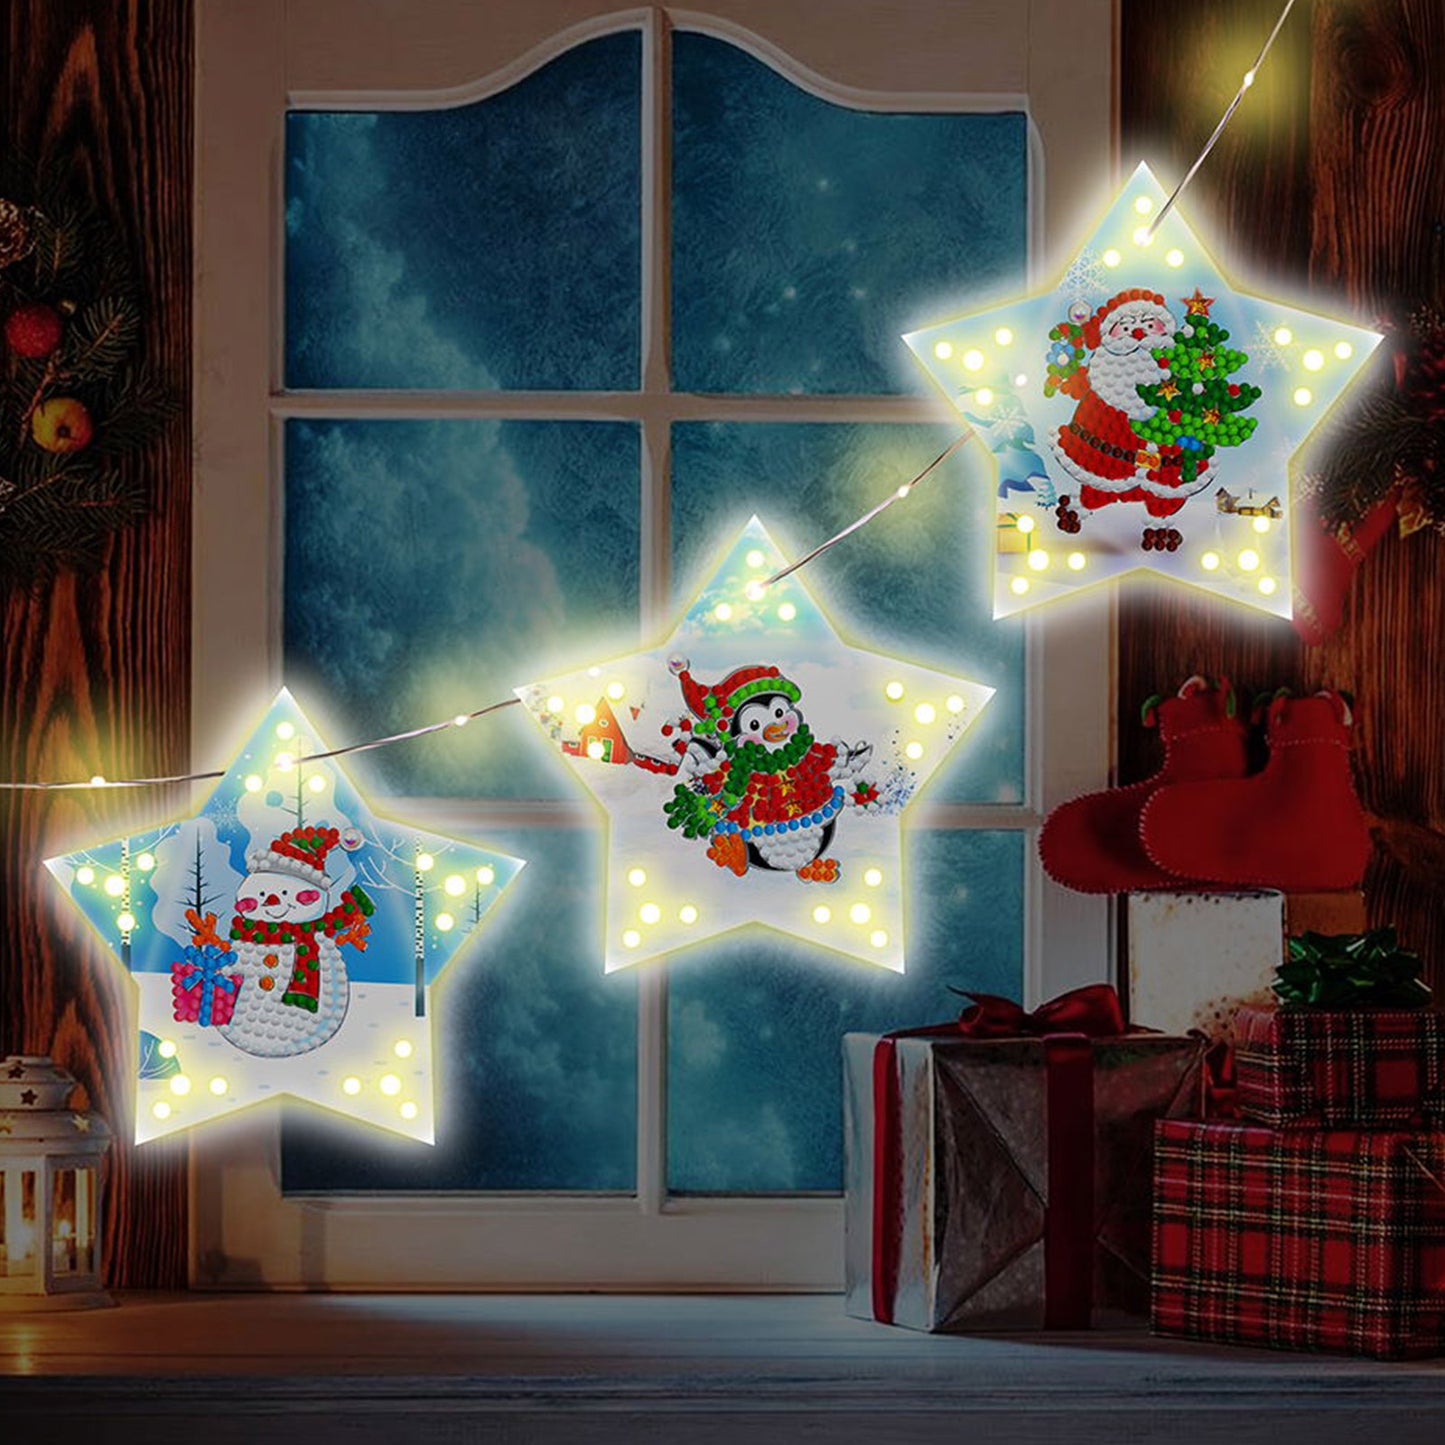 3pcs 5D DIY Diamond Art Painting Lamp with LED Lights Christmas Santa Claus Crystal Embroidery Kit Arts Crafts for Home